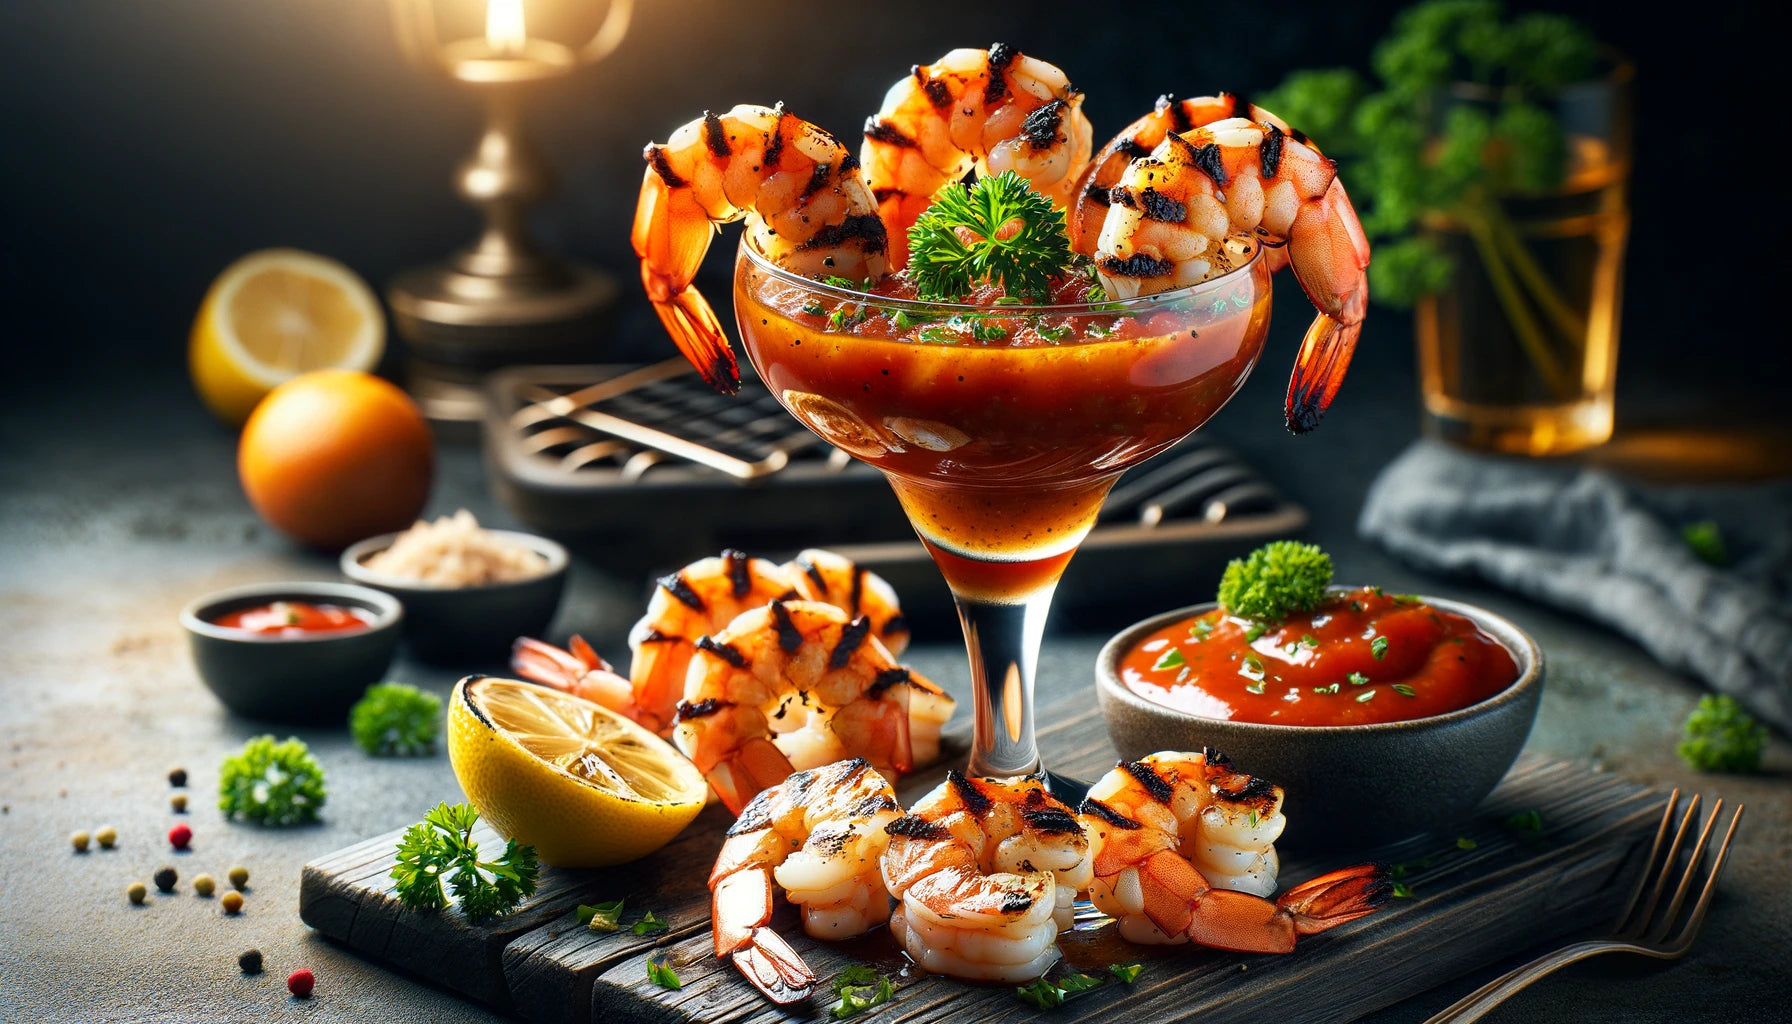 Grilled Shrimp Cocktail Recipe - Perfect for Arteflame Grilling